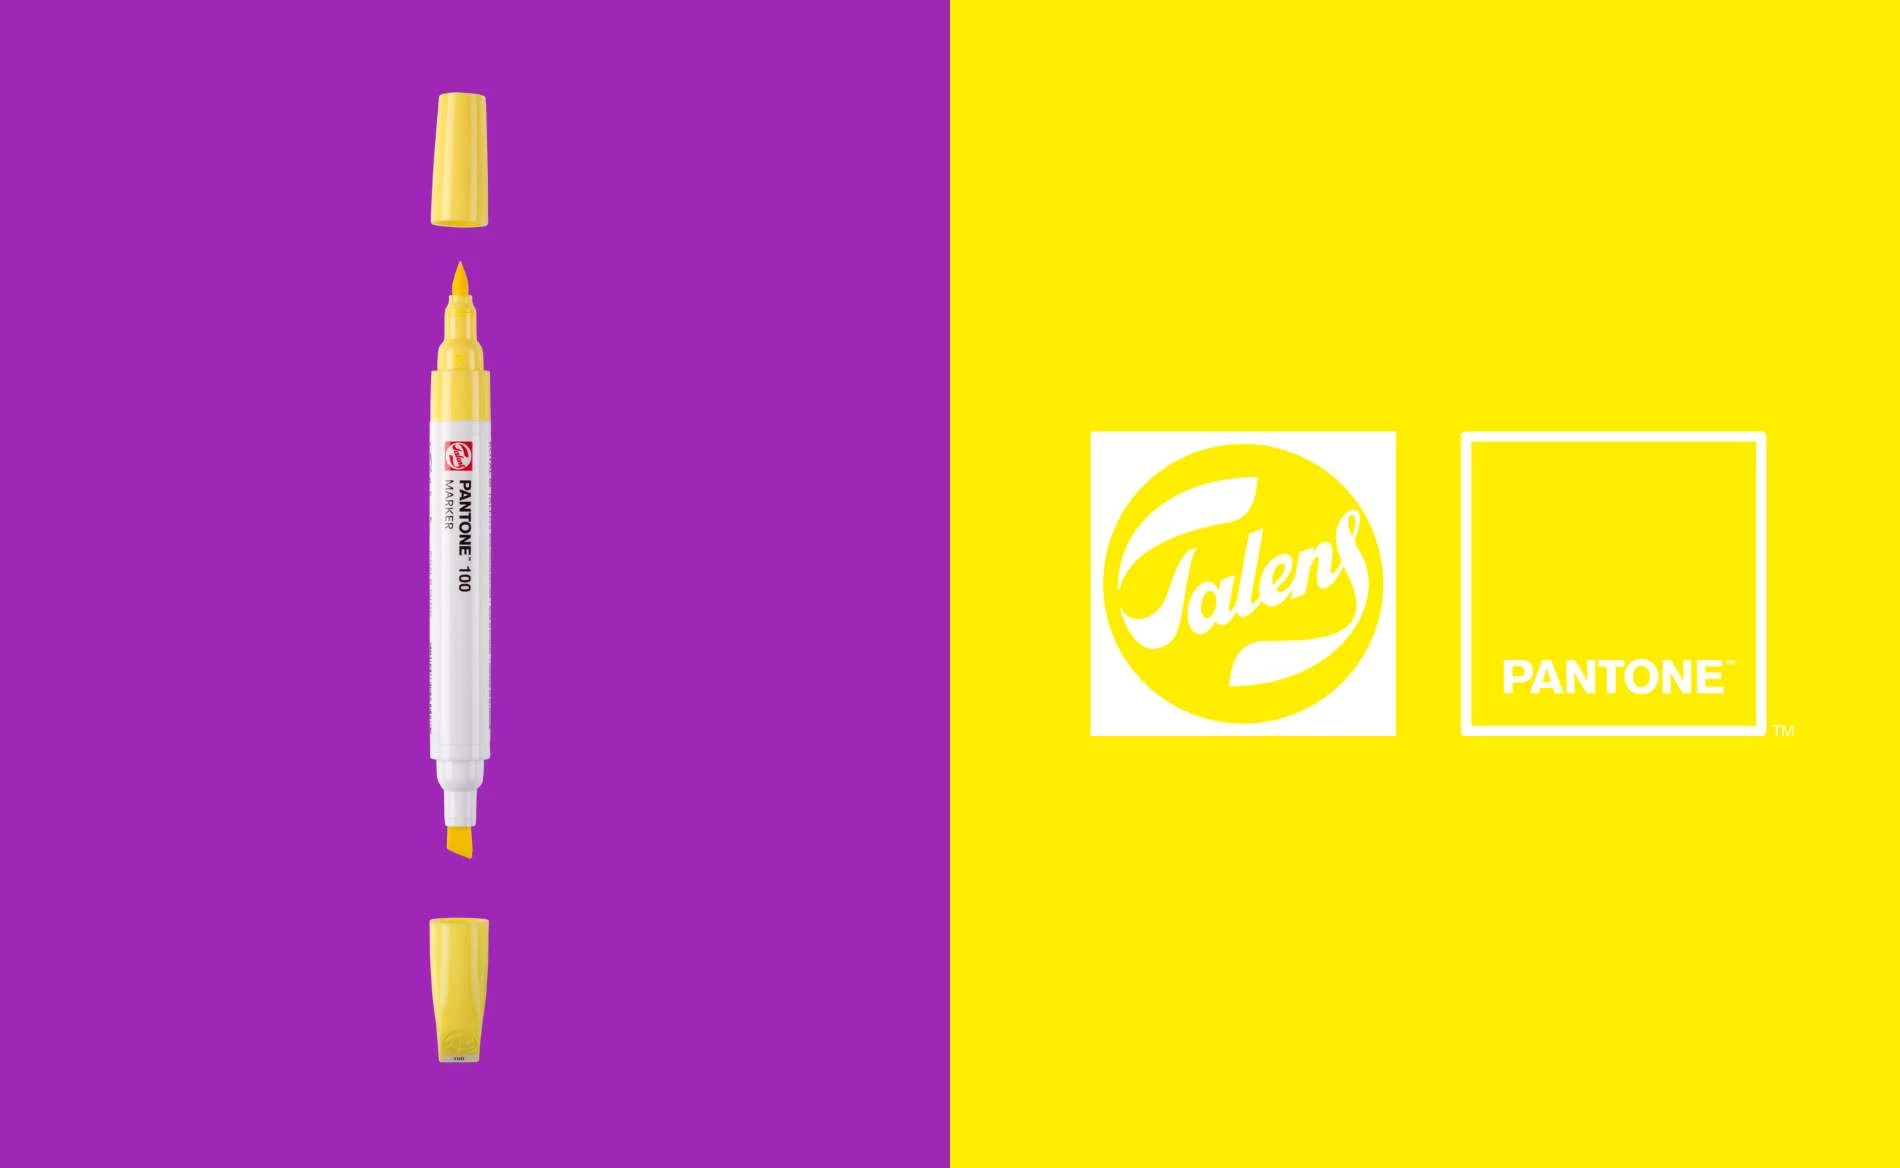 Announcing the Talens | Pantone collection